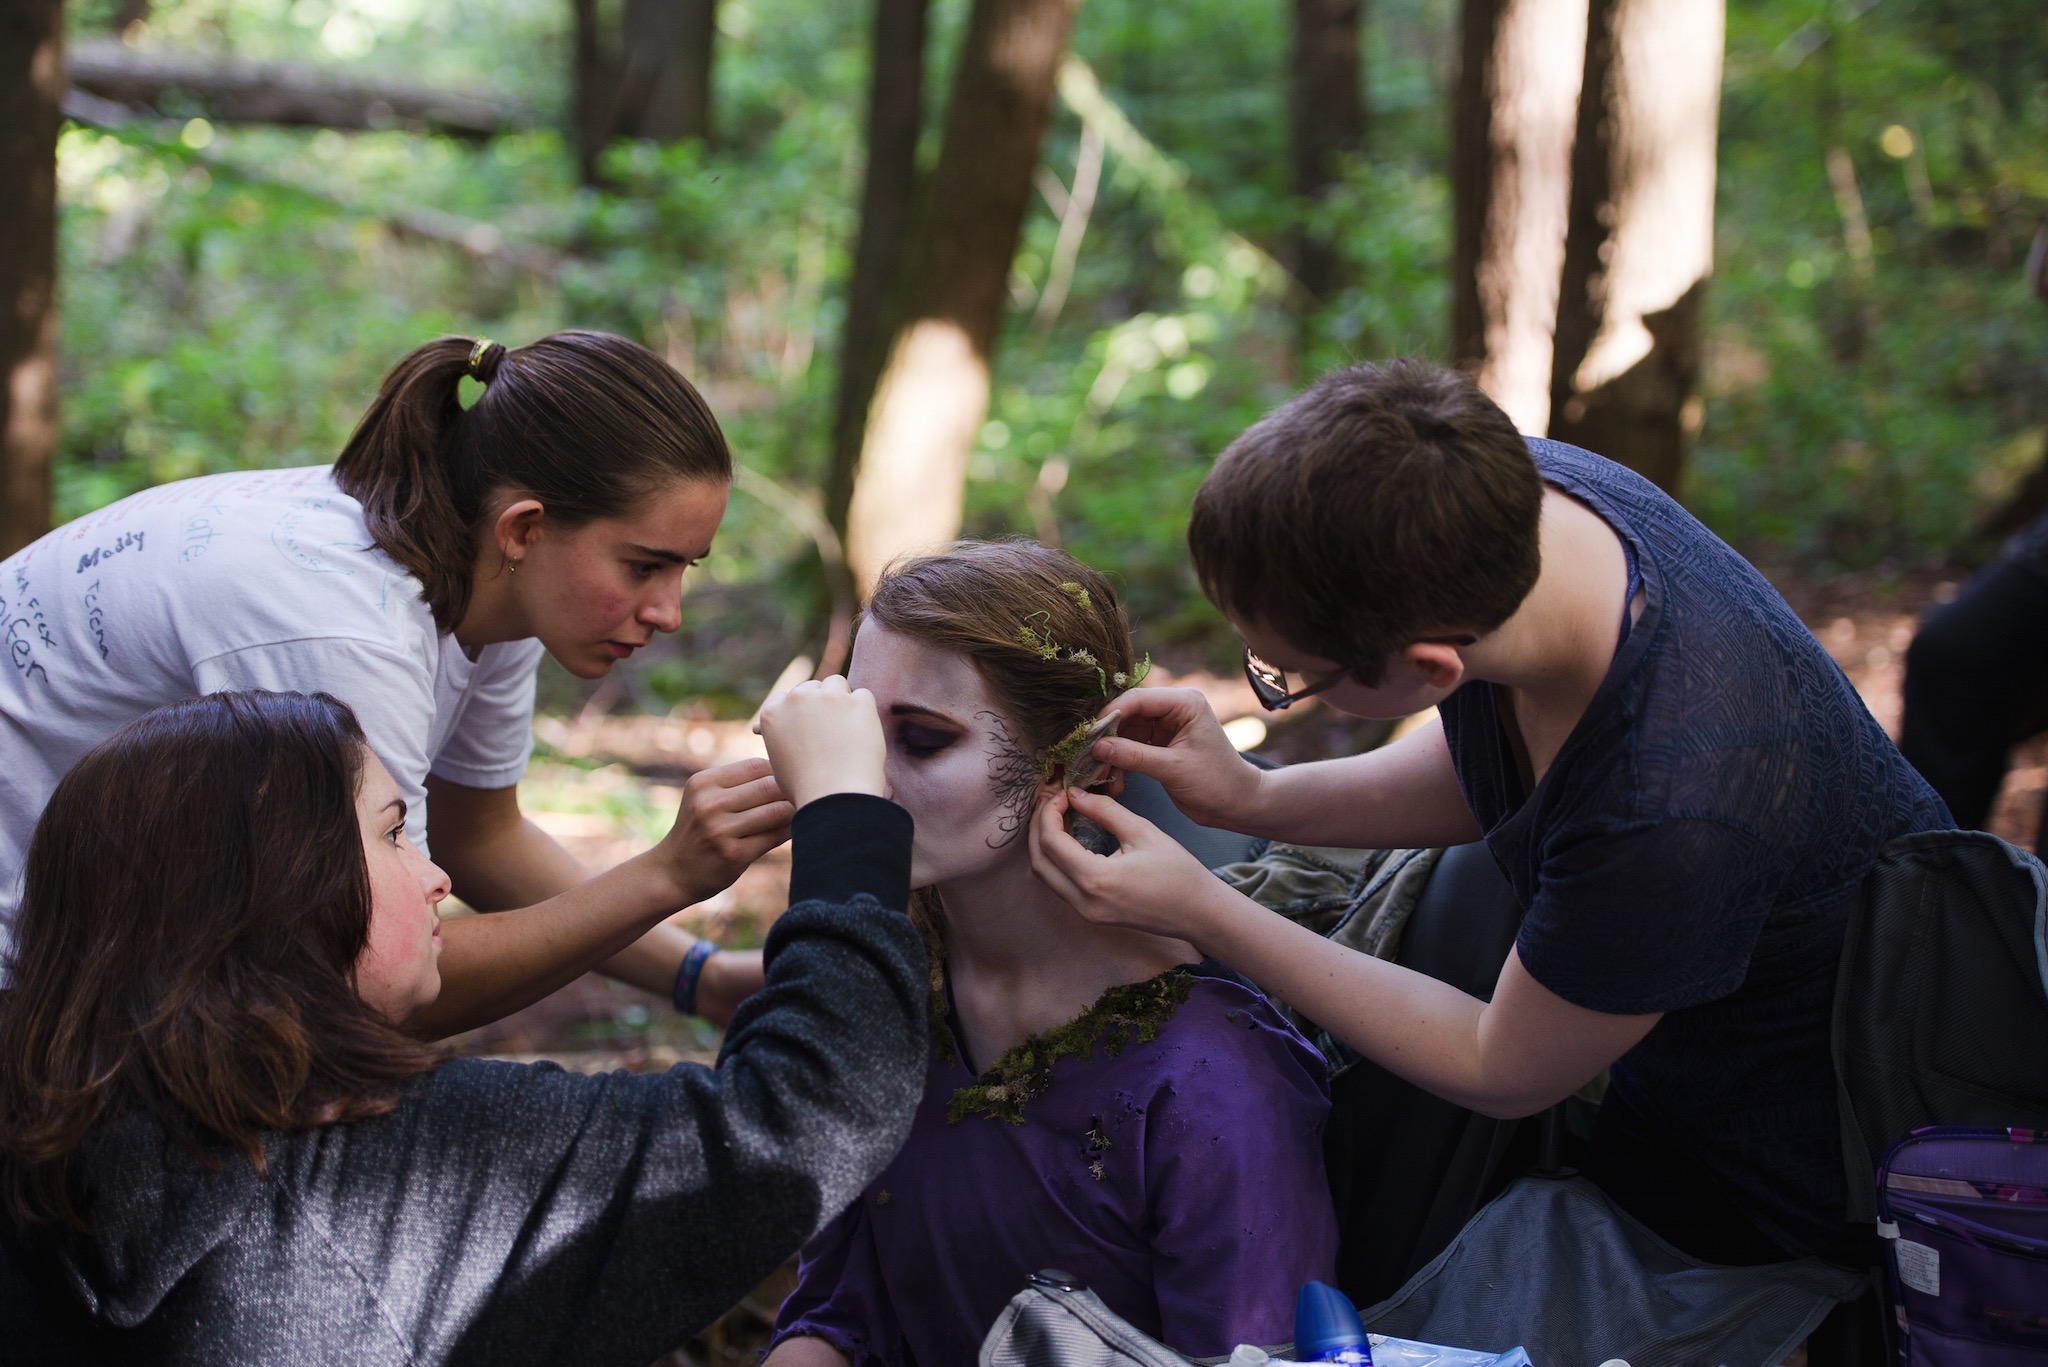 Julia Frangione, Laura Gray, and Morgana McKenzie performing makeup touchups on Rose Donoghue as 